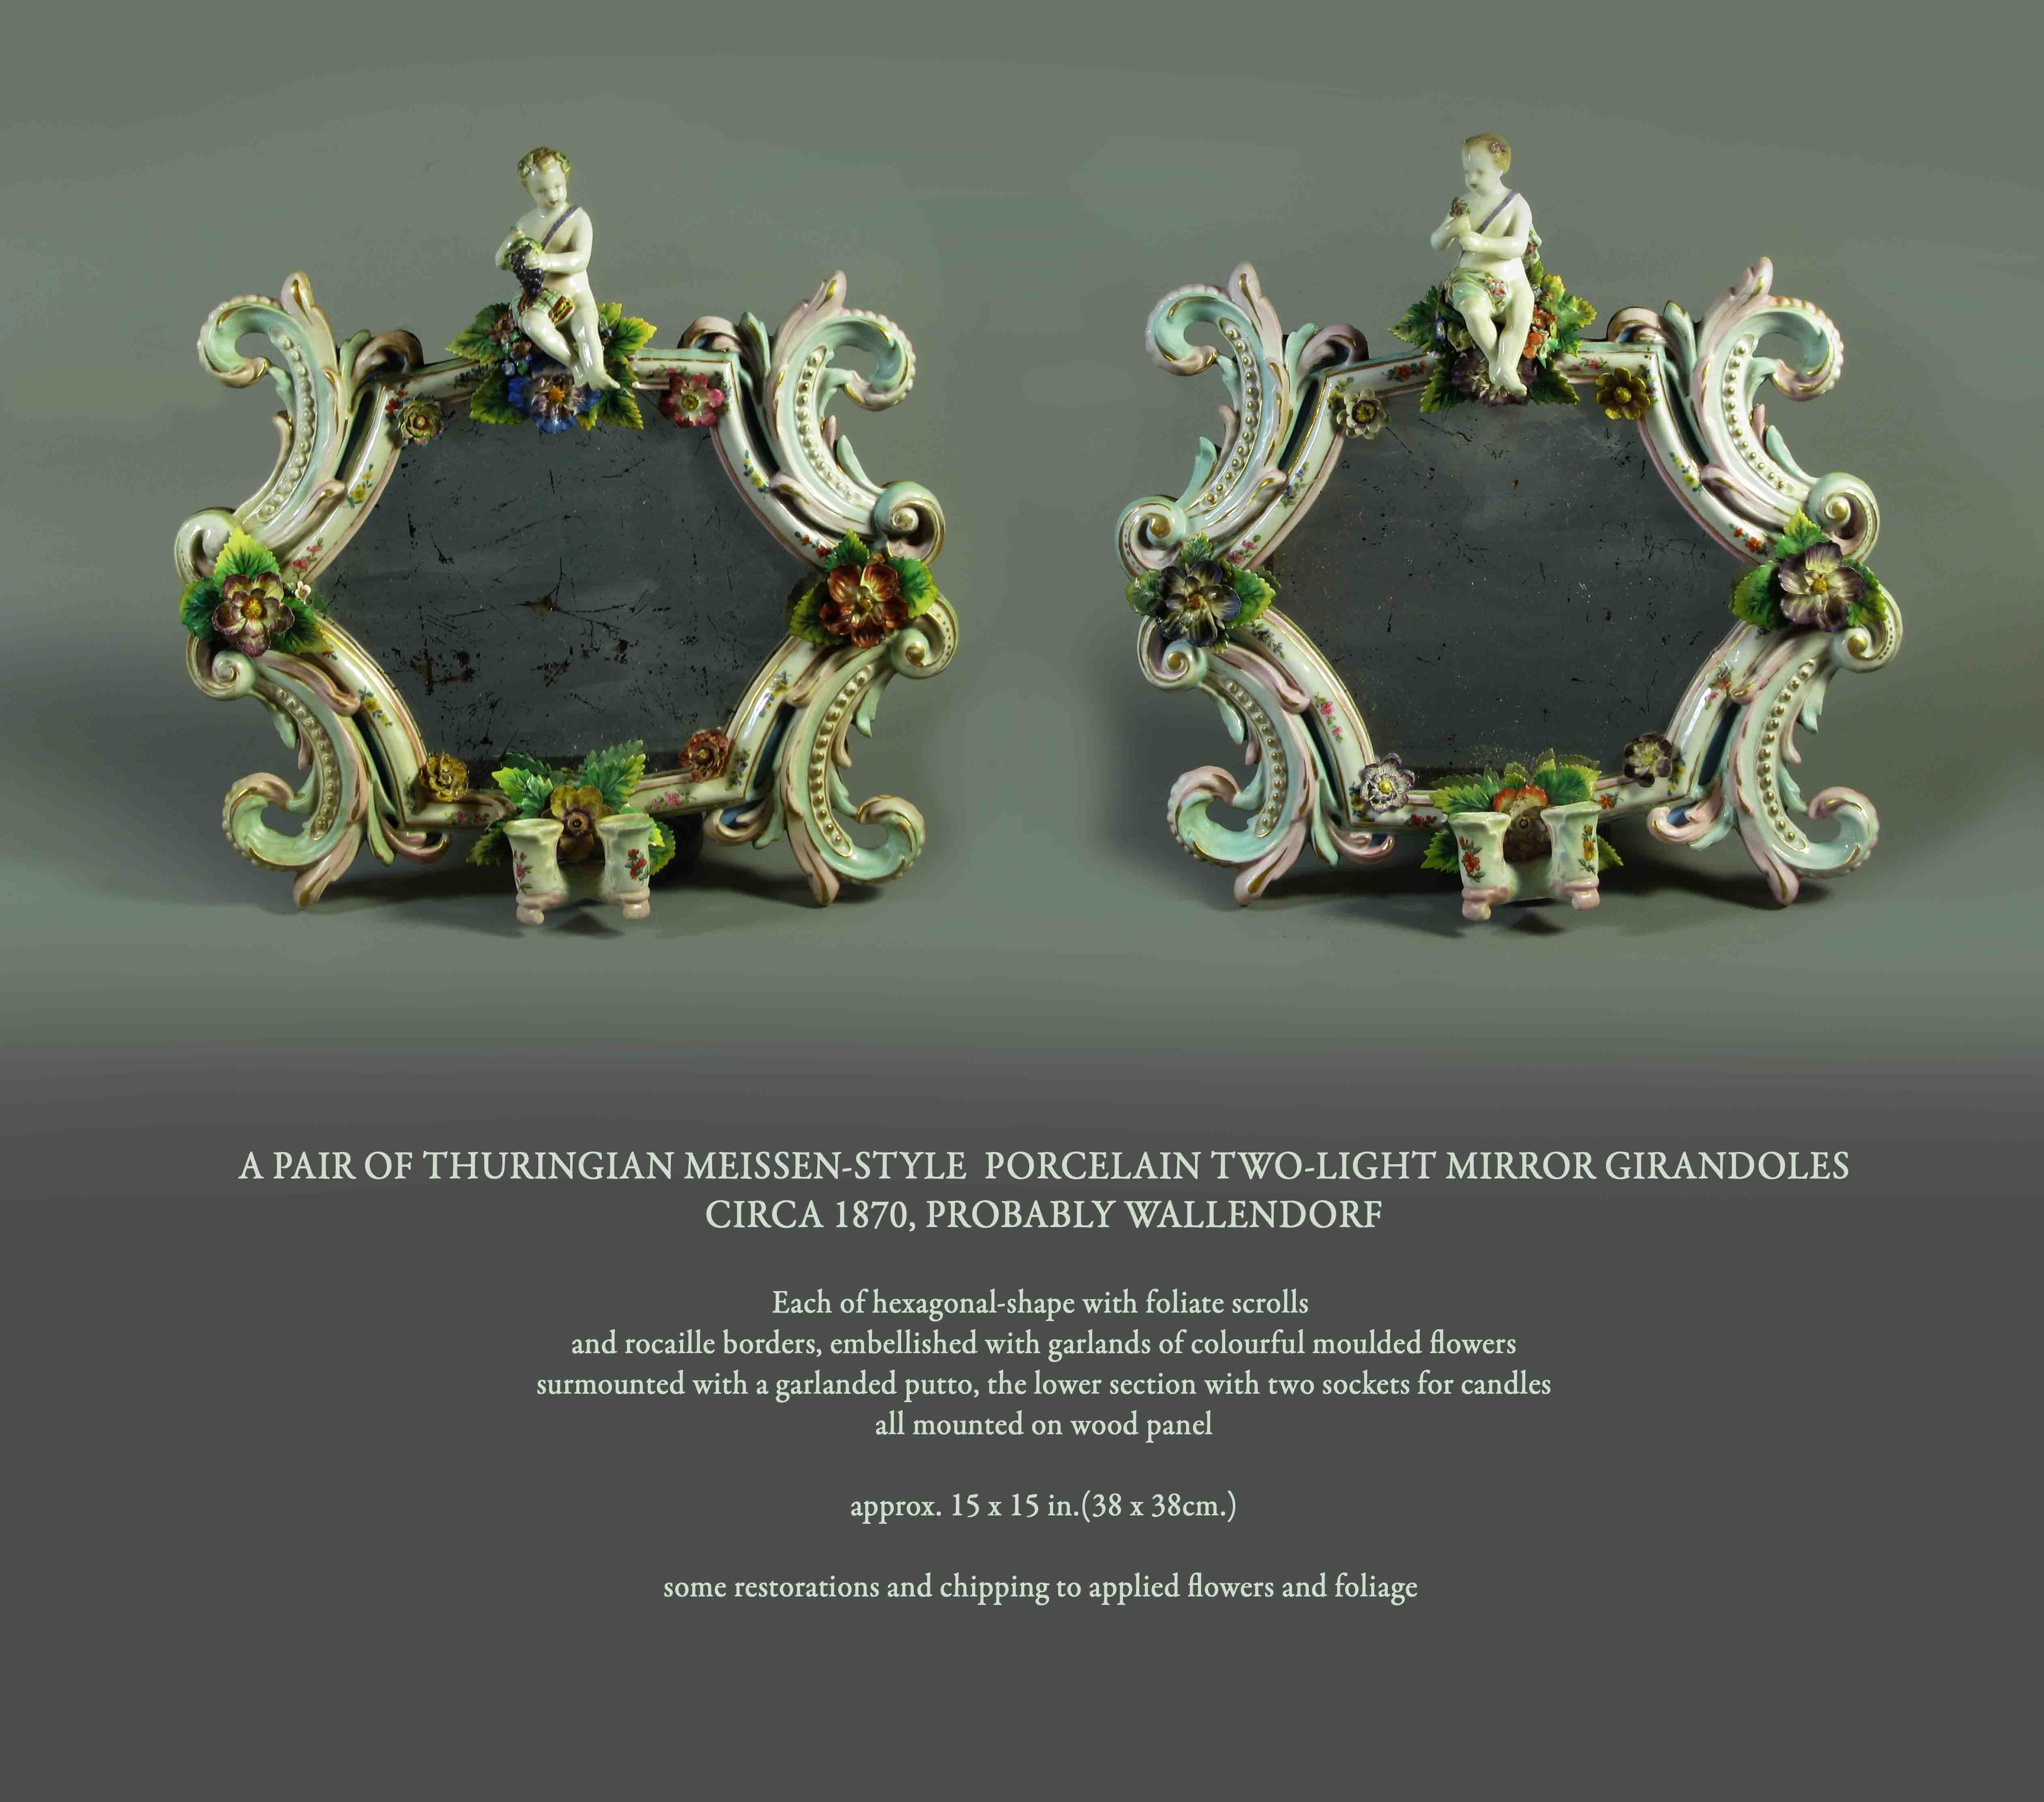 A pair of Thuringian Meissen-style porcelain two-light mirror Girandoles
Circa 1870, probably Wallendorf

Each of hexagonal-shape with foliate scrolls 
and rocaille borders, embellished with garlands of colourful moulded flowers
surmounted with